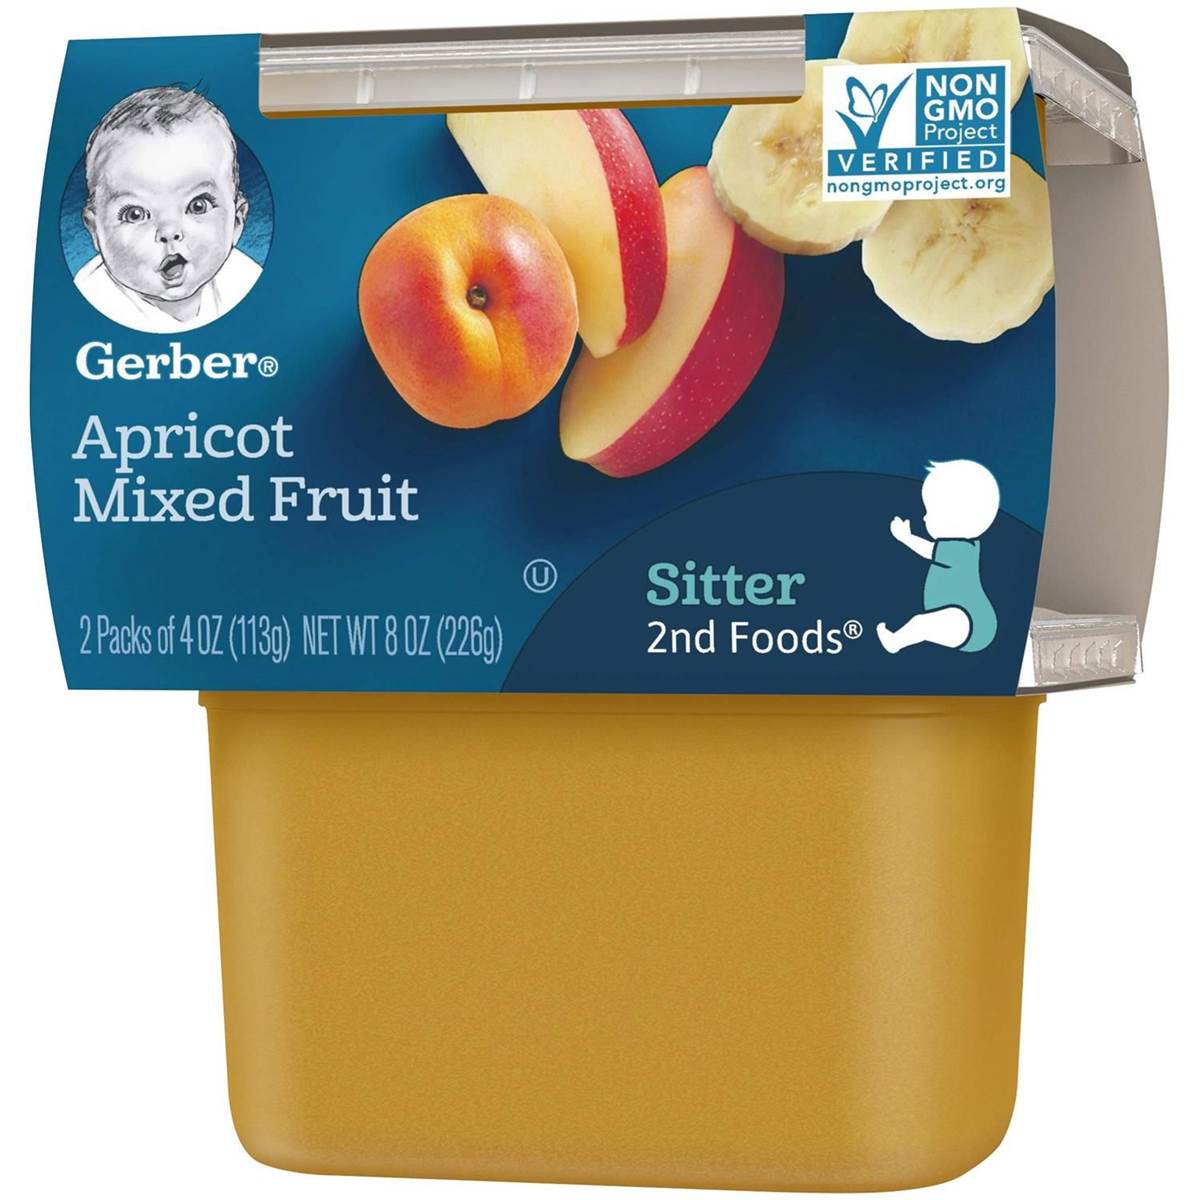 Gerber 2nd Foods for Sitter - Apricot Mixed Fruit